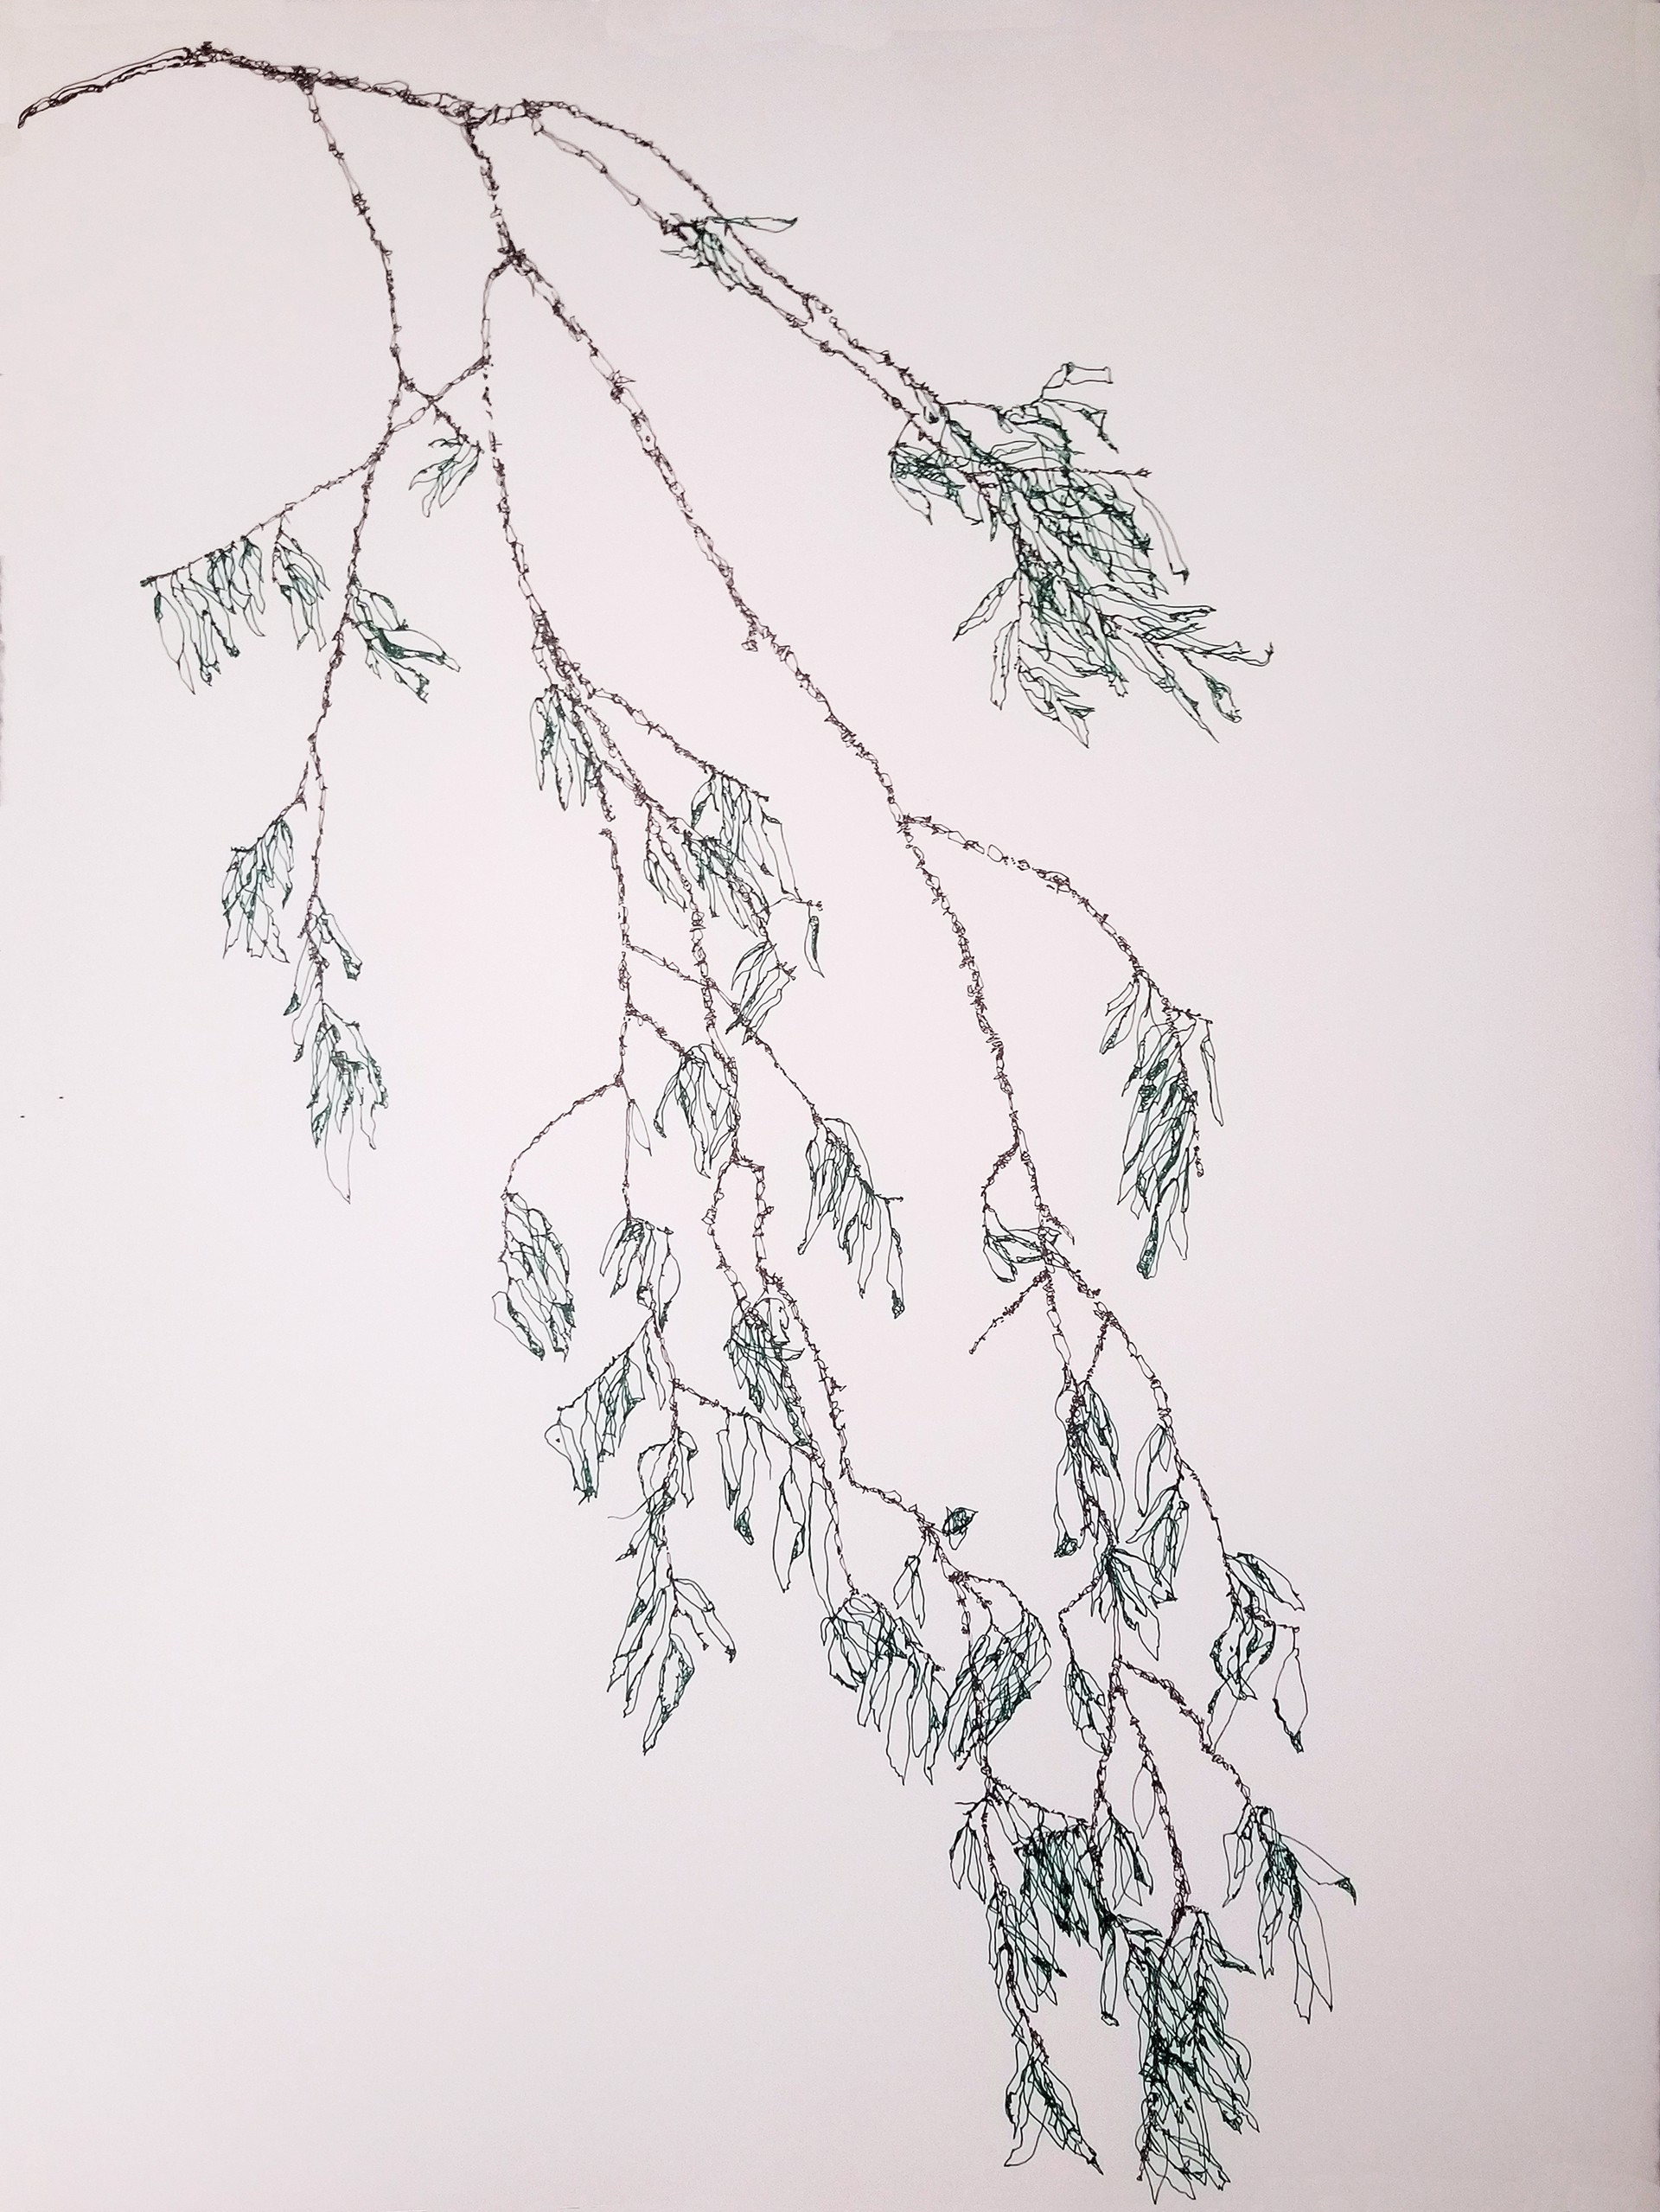 9,037 tracings of parts of a branch by John Adelman